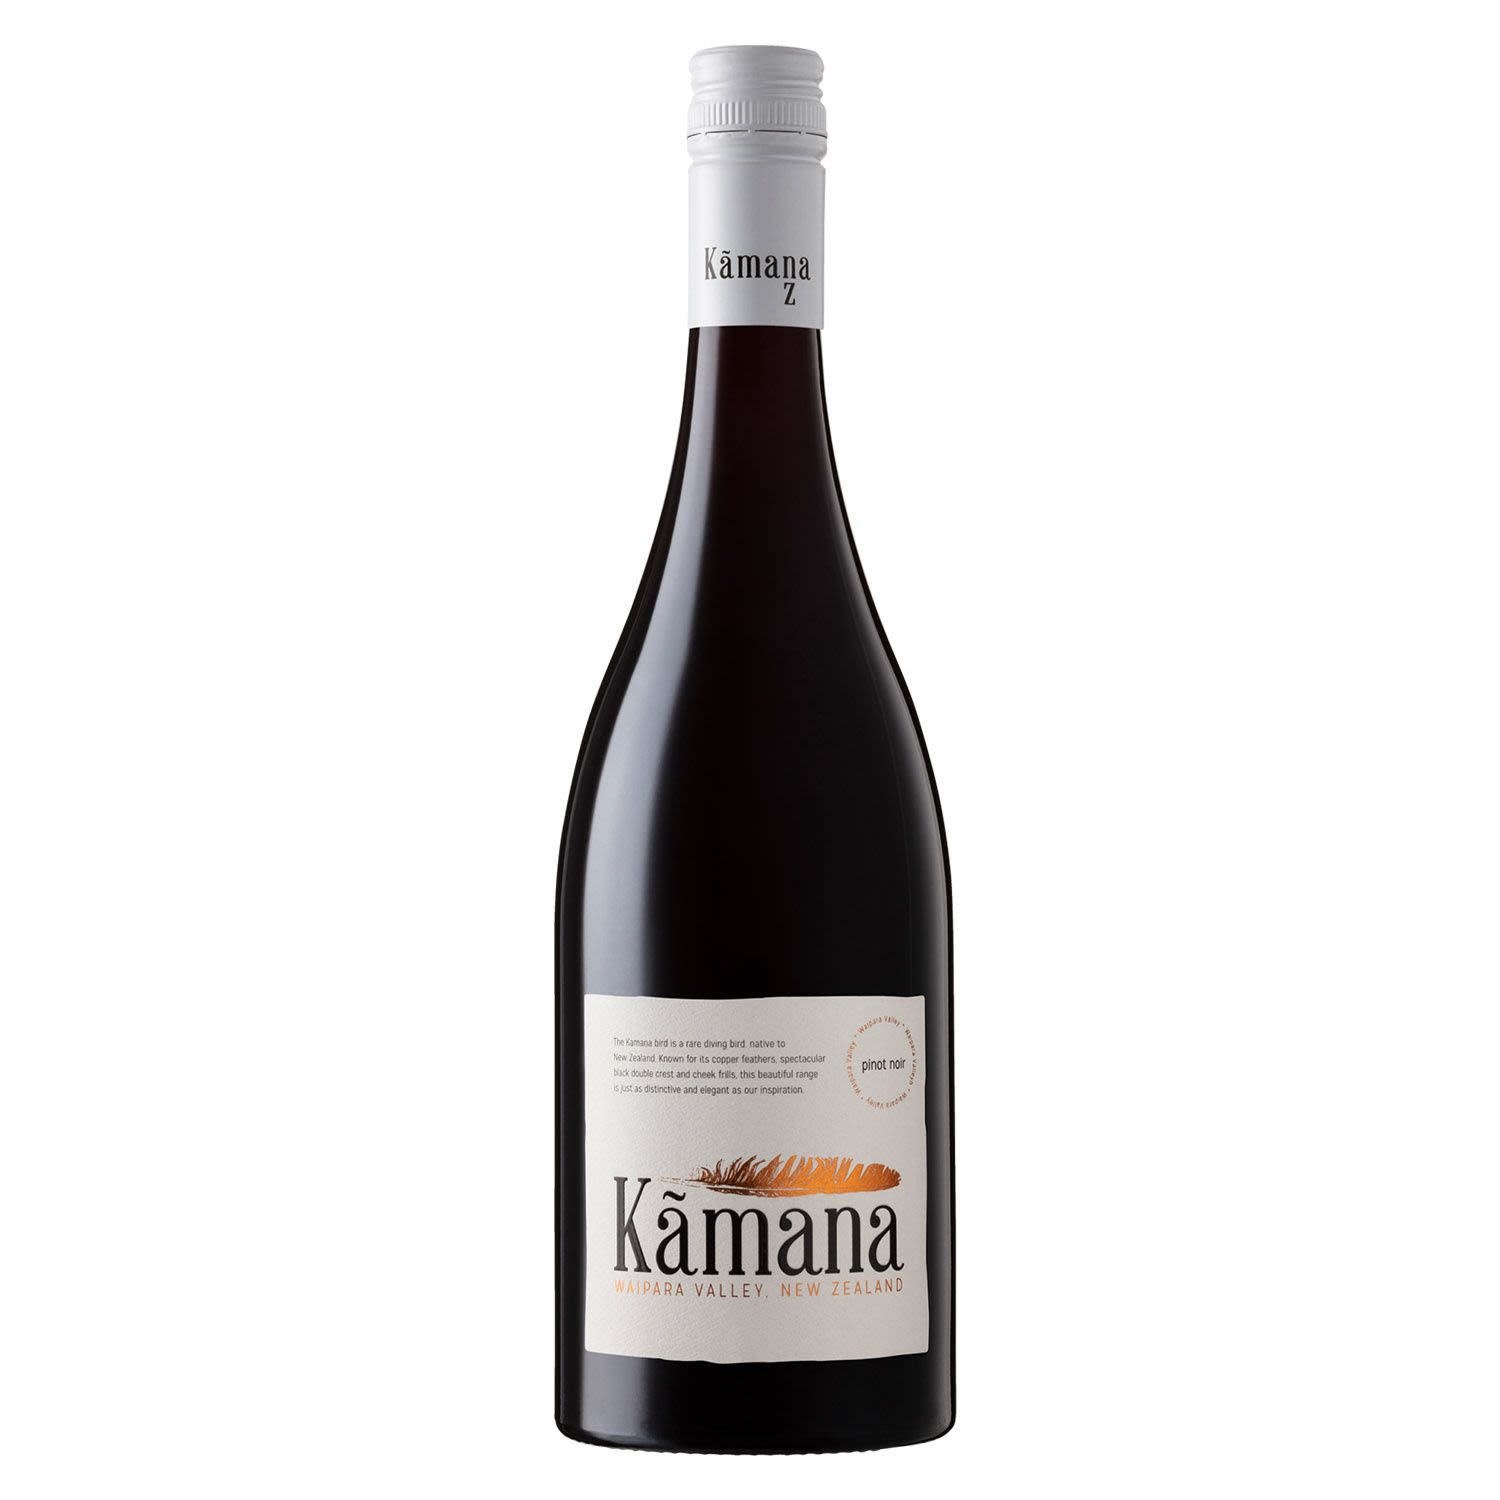 Kamana is a full flavoured wine that pays homage to the striking Kamana bird that hails from the same location. Known as majestic and distinctive, the bird mirrors the characteristics that we set out to achieve in crafting this wine. Aromatics of ripe cherry with a smoky oak complexity and lingering savoury finish. Pair with duck and poultry.<br /> <br />Alcohol Volume: 13.00%<br /><br />Pack Format: Bottle<br /><br />Standard Drinks: 7.7</br /><br />Pack Type: Bottle<br /><br />Country of Origin: New Zealand<br /><br />Region: Waipara Valley<br /><br />Vintage: Vintages Vary<br />